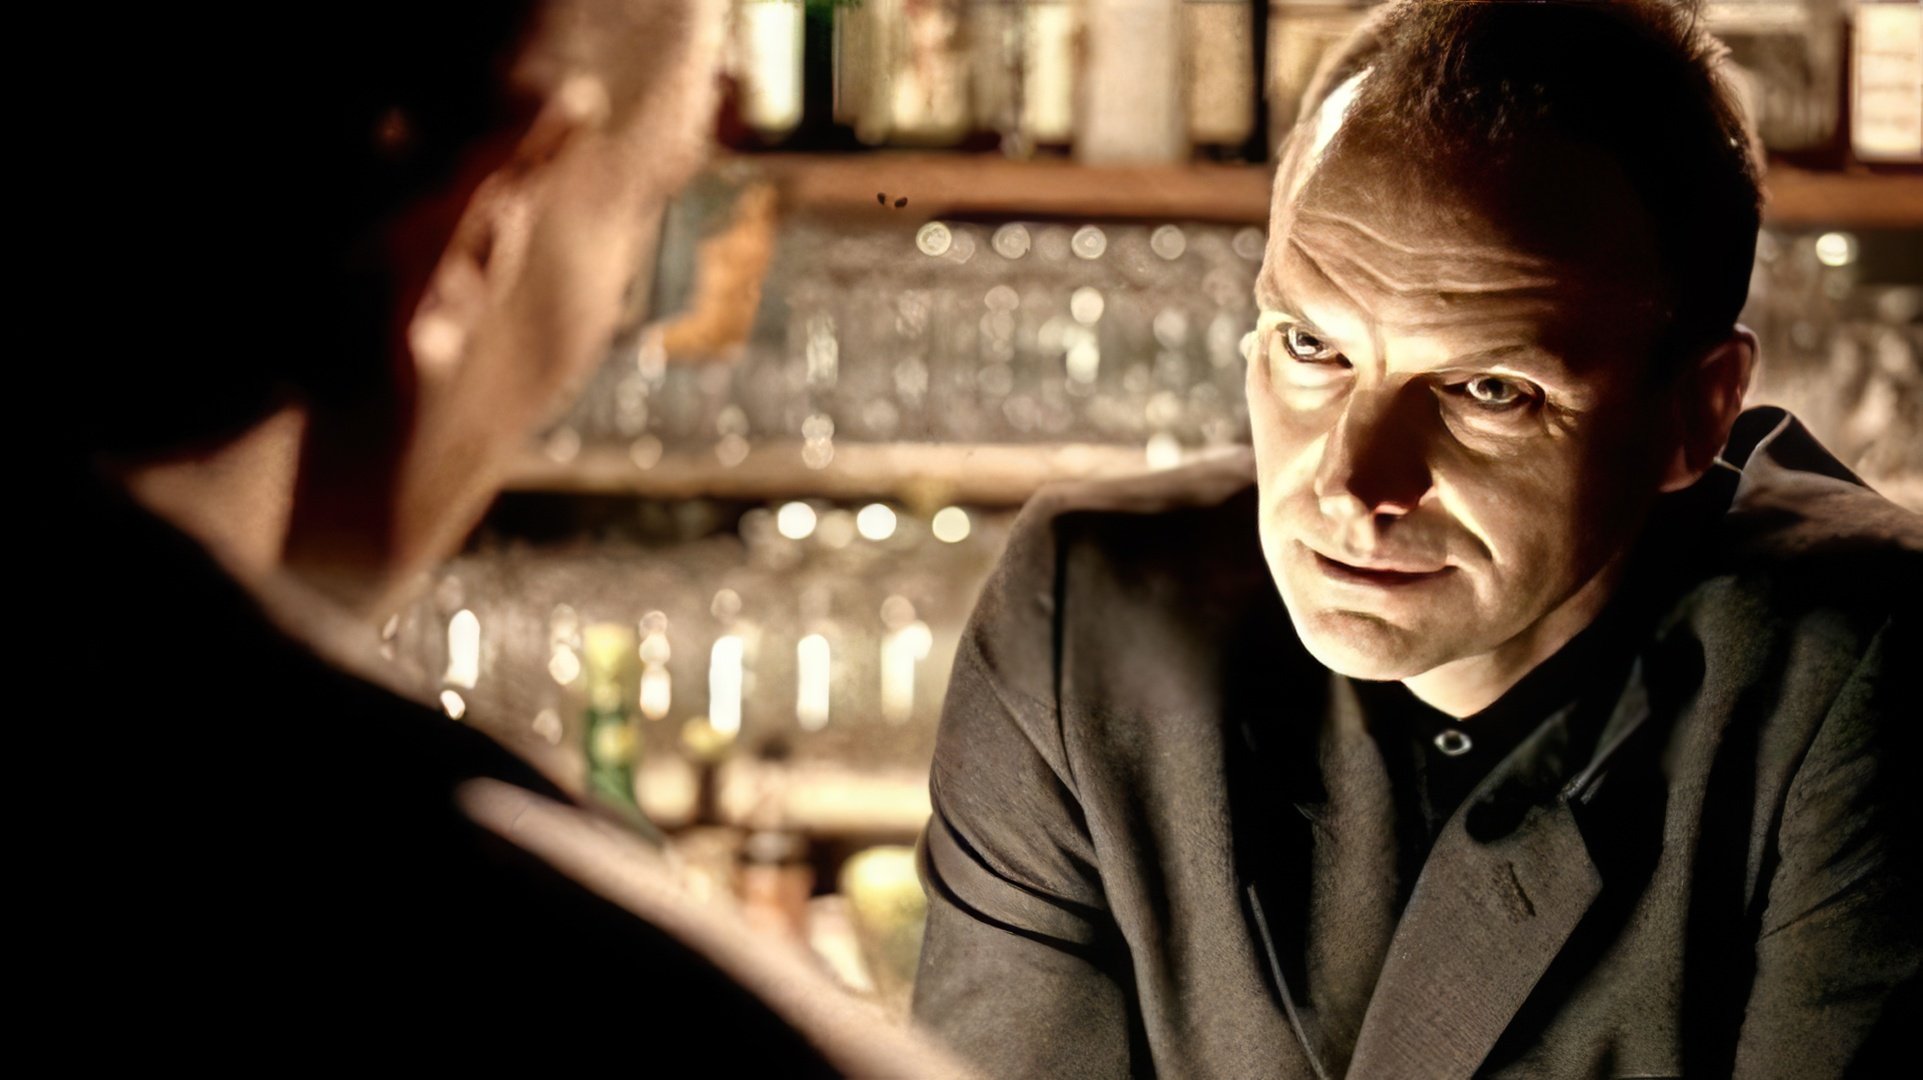 Sting in the film “Lock, Stock and Two Smoking Barrels”